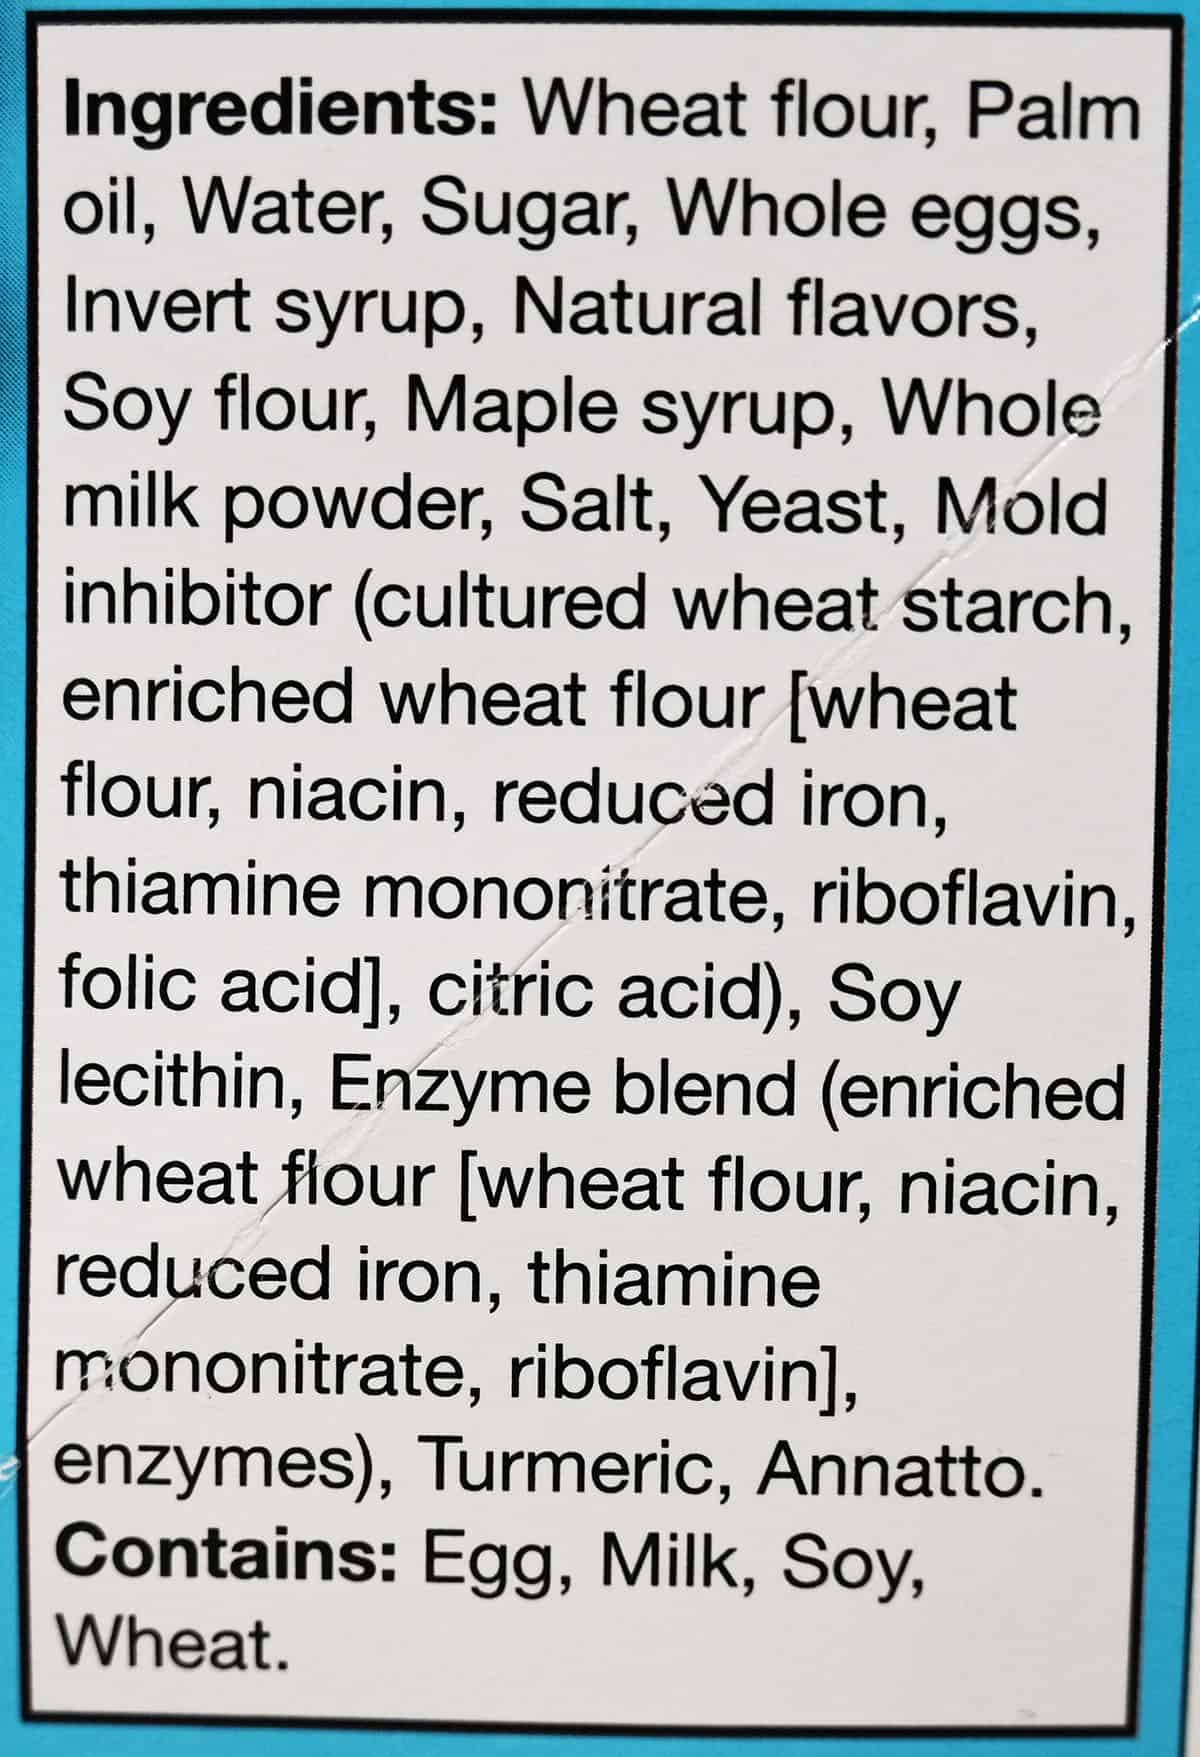 Image of the waffle ingredients list from the box.